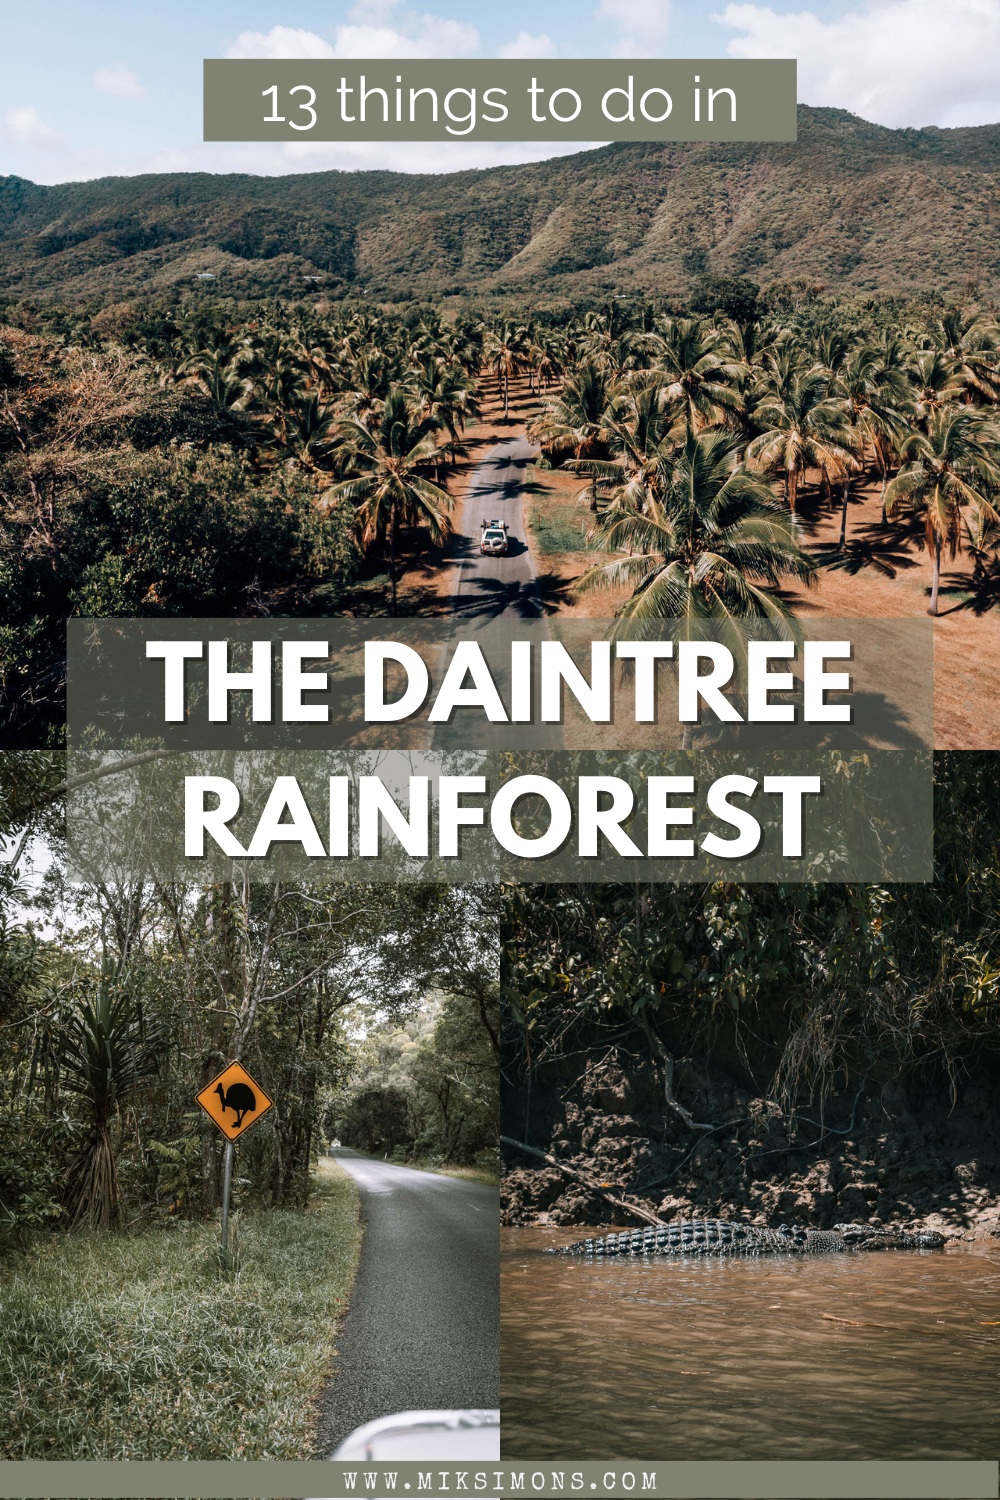 DAINTREE RAINFOREST - 11 AWESOME THINGS TO DO FROM CAIRNS TO CAPE TRIBULATION3